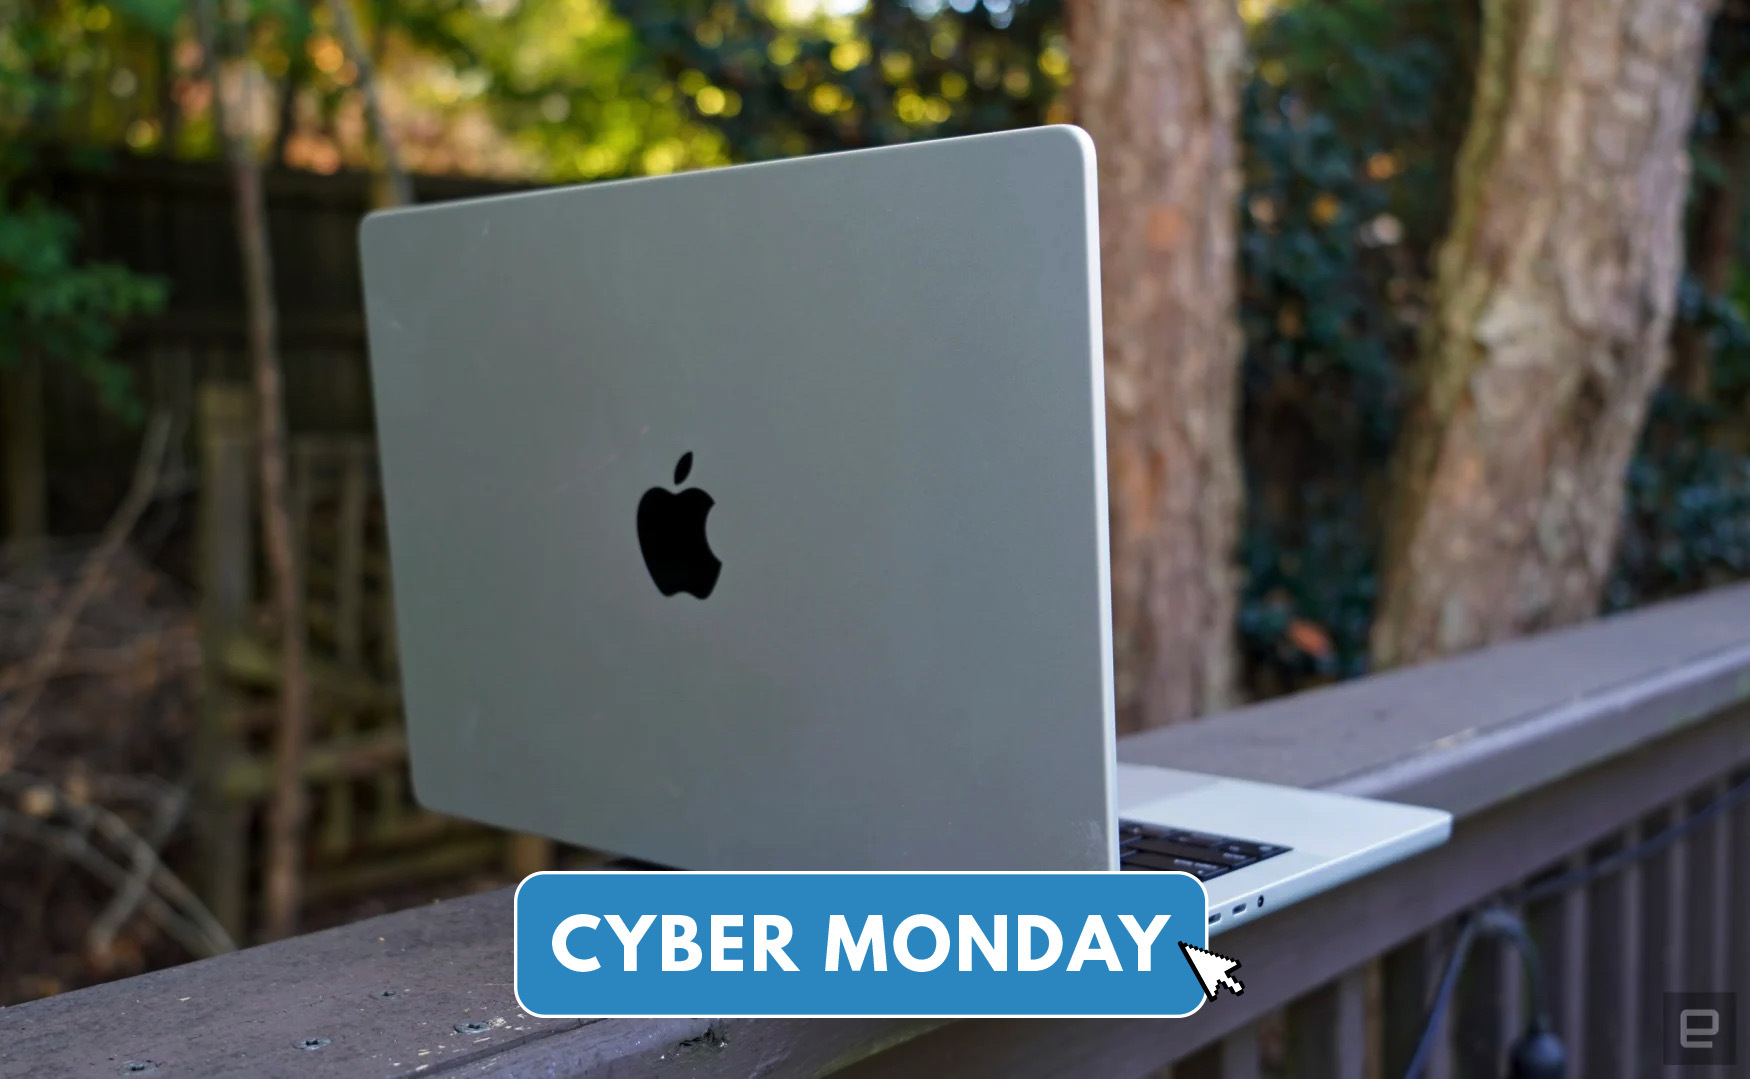 The 17 best Cyber Monday laptop deals from Amazon, Best Buy and others